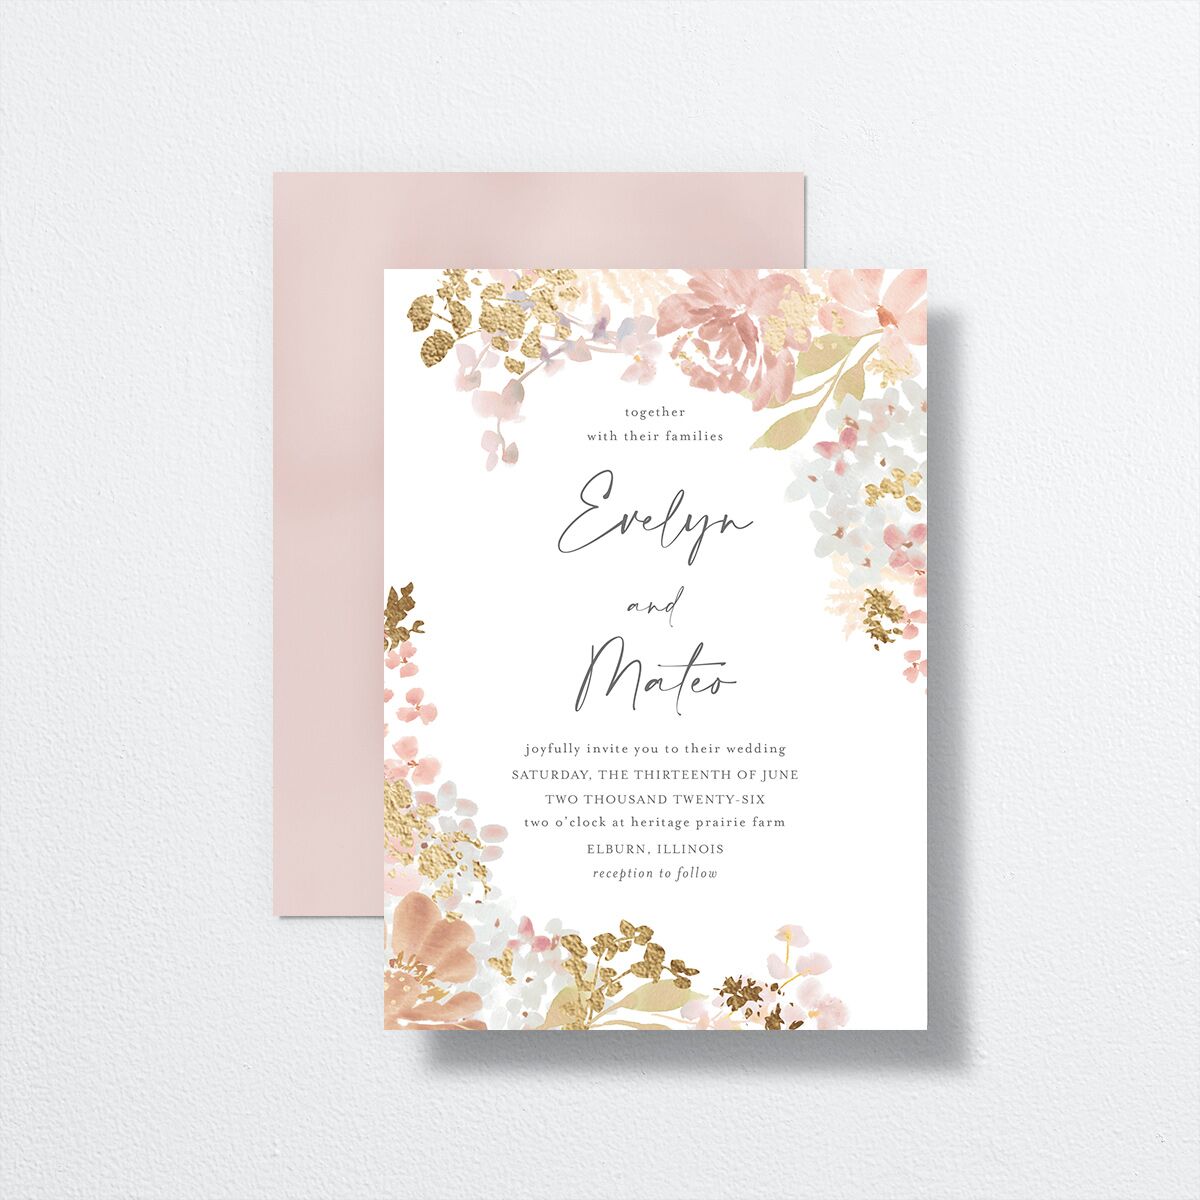 Hydrangea Garden Wedding Invitations front-and-back in pink